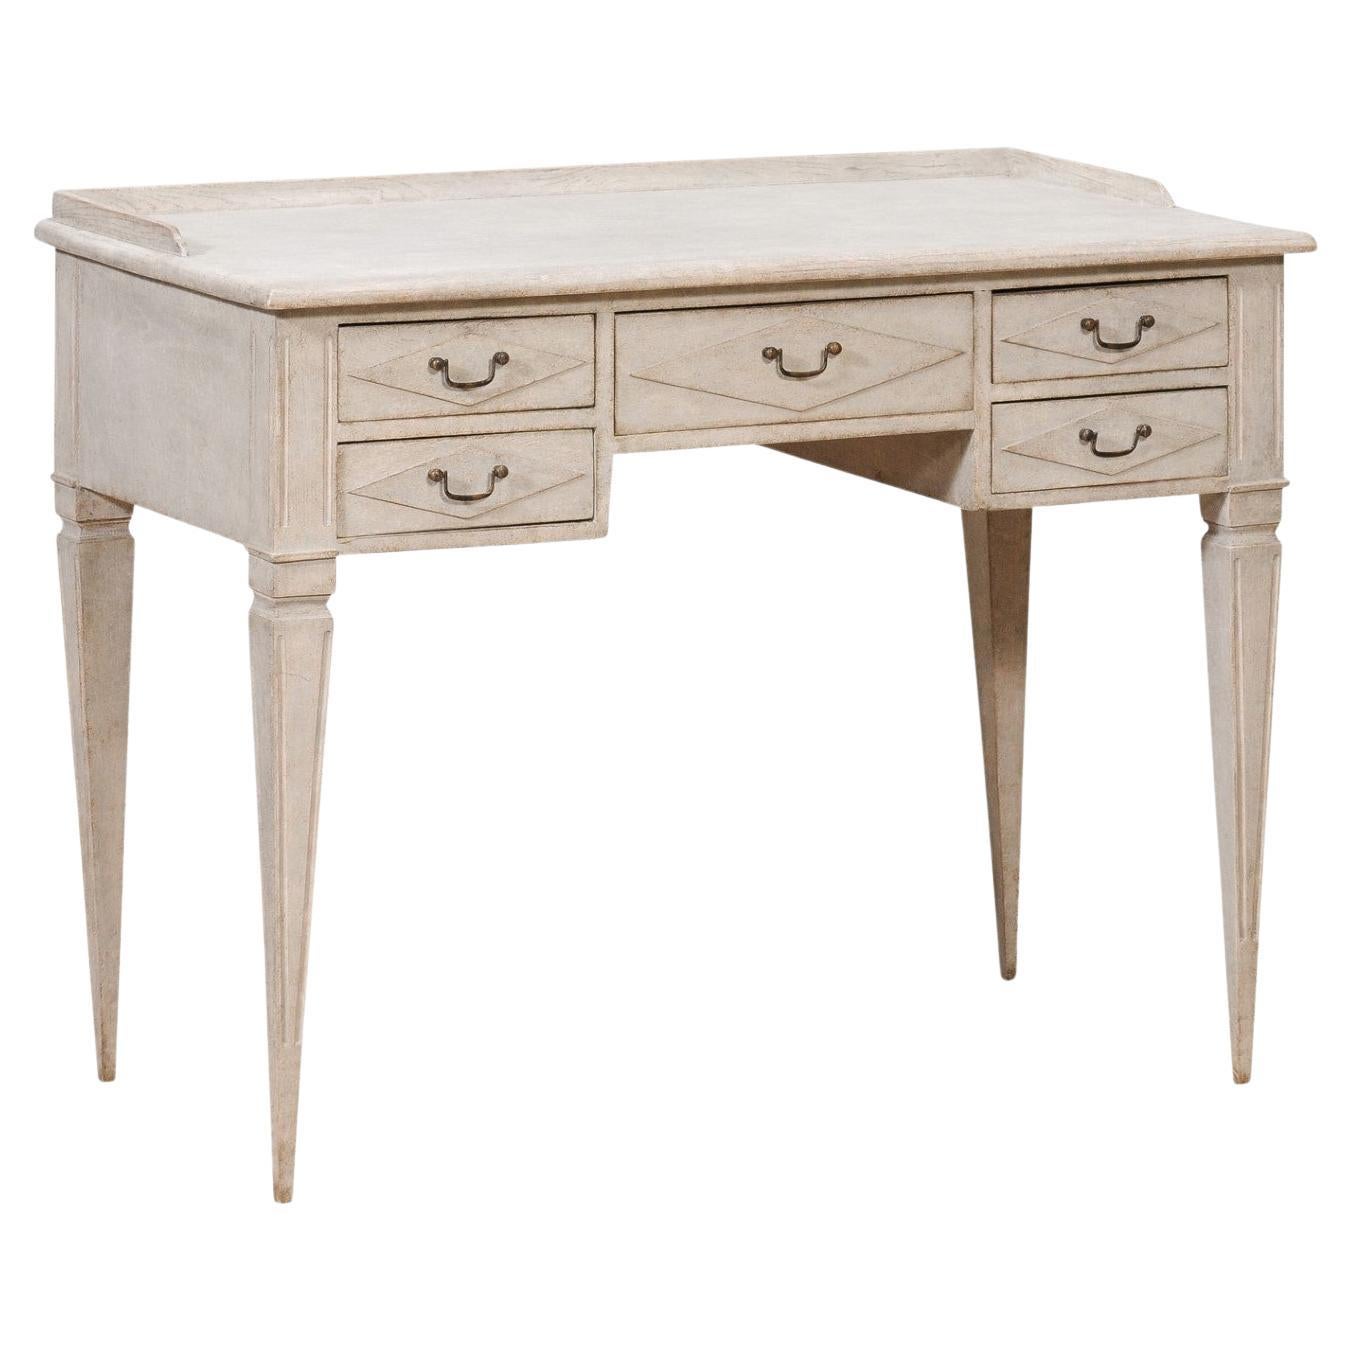 1880s Swedish Gustavian Style Painted Desk with Five Drawers and Tapered Legs